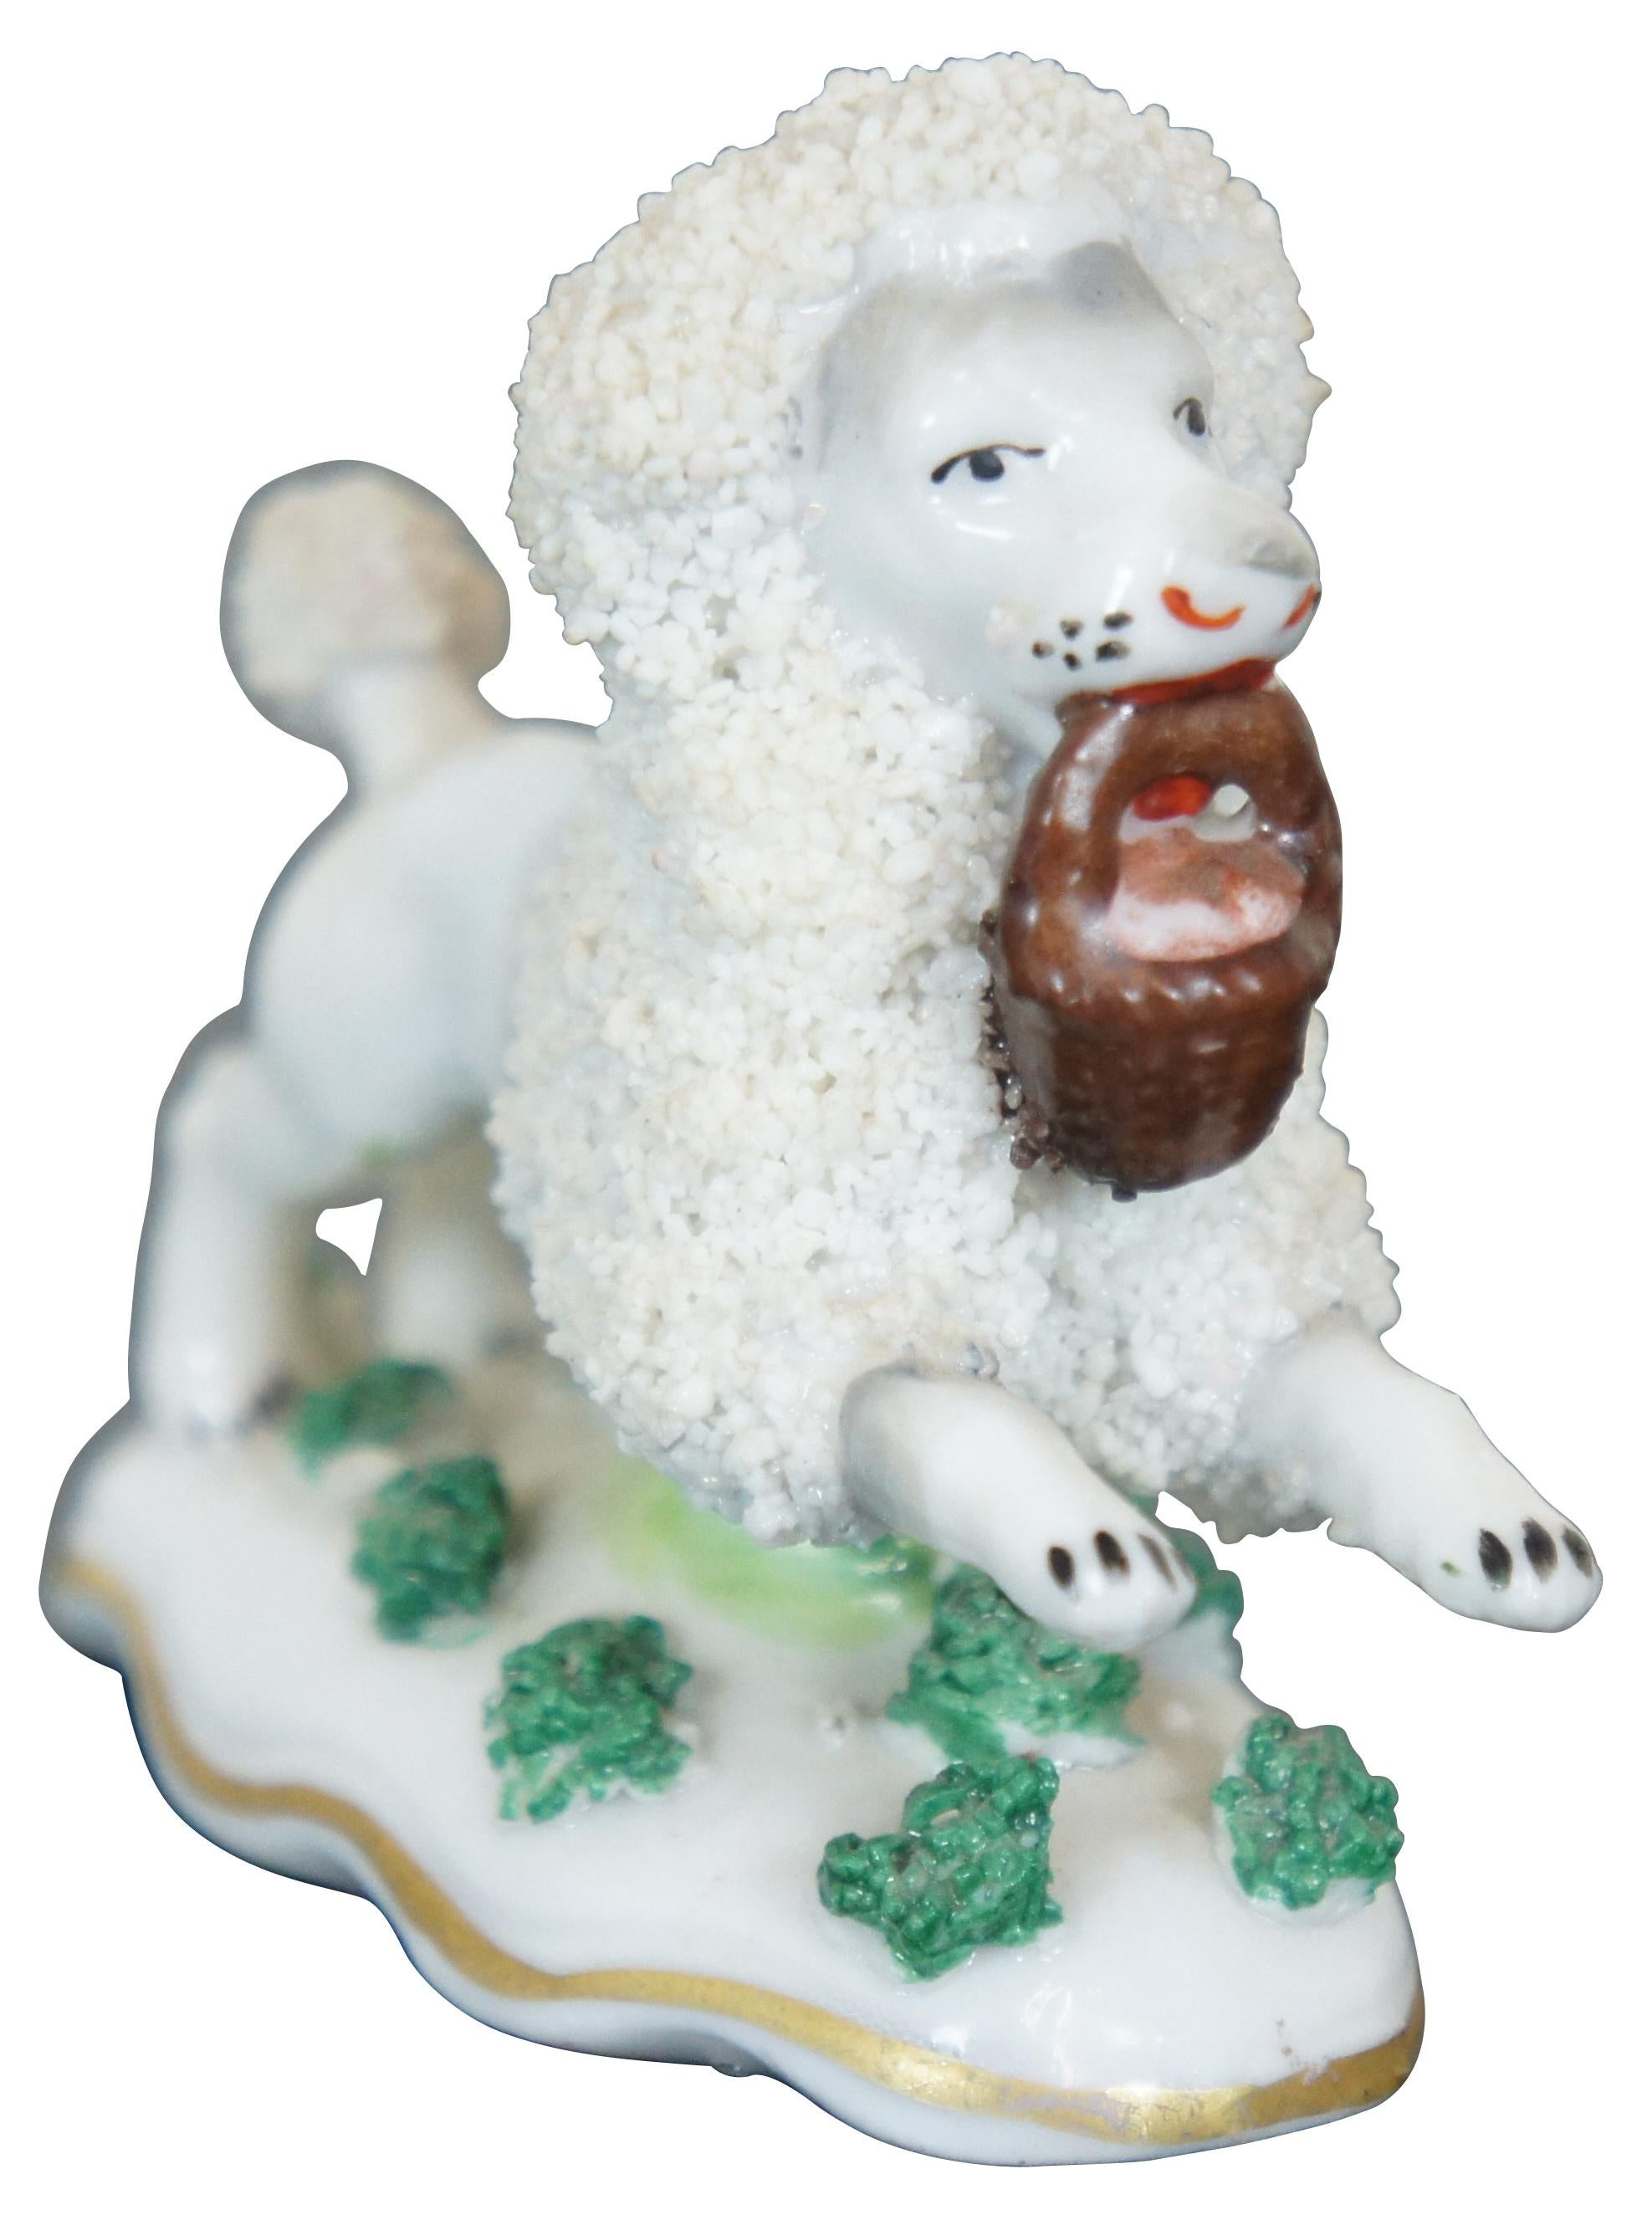 Antique 1885 - 1920s miniature porcelain figurine in the shape a white poodle with confetti fur running with a basket in its mouth. Marked Germany on base opposite a Samson golden anchor. This mark was used on Chelsea Reproductions. Measure : 2.5”.